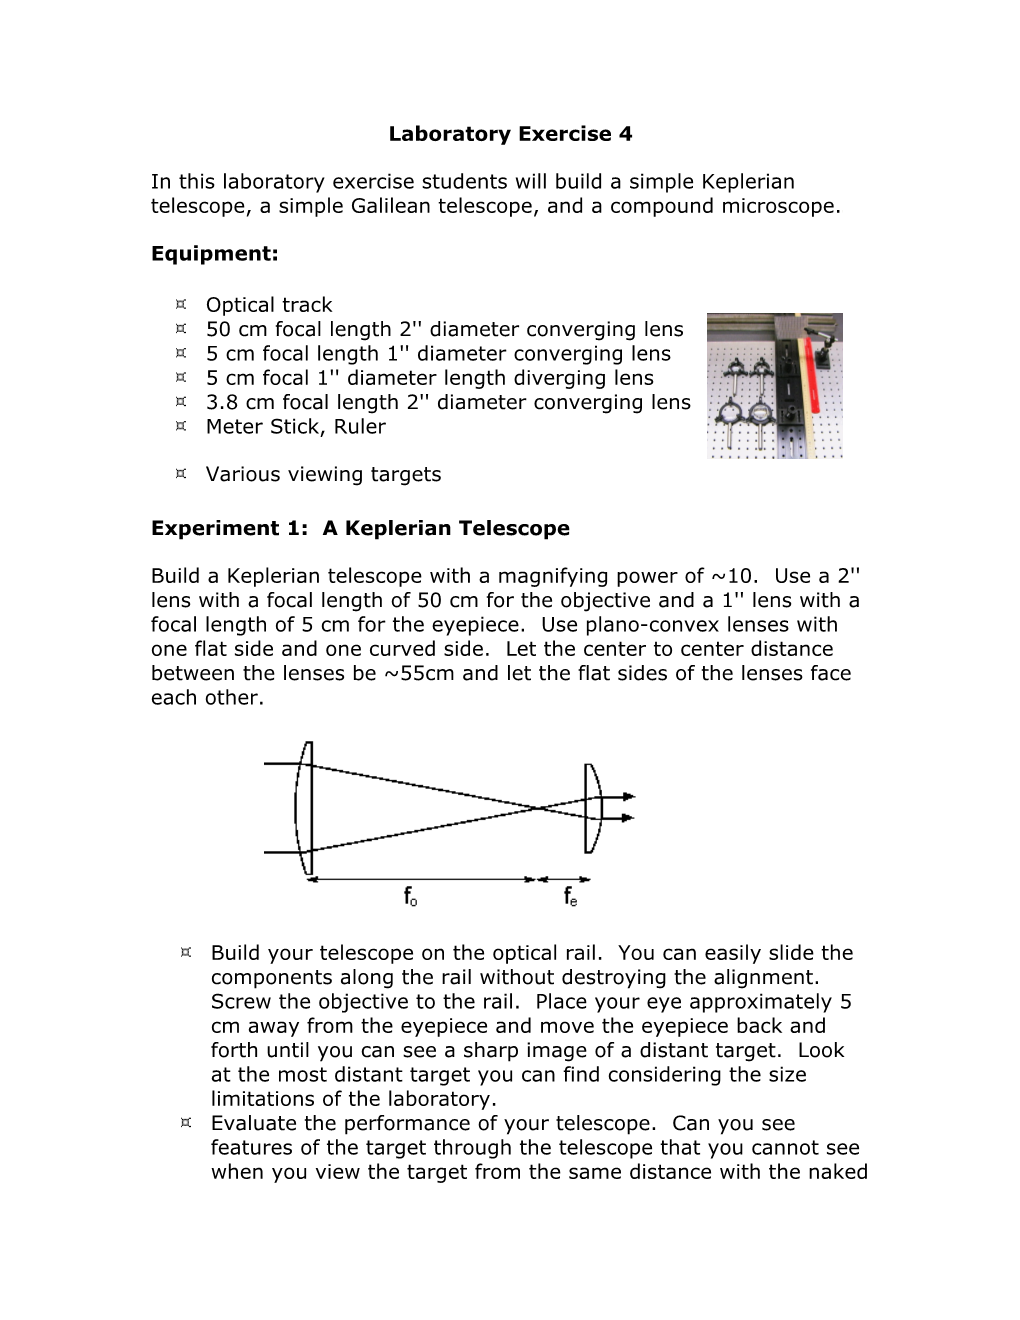 In This Laboratory Exercise Students Will Build a Simple Keplerian Telescope, a Simple